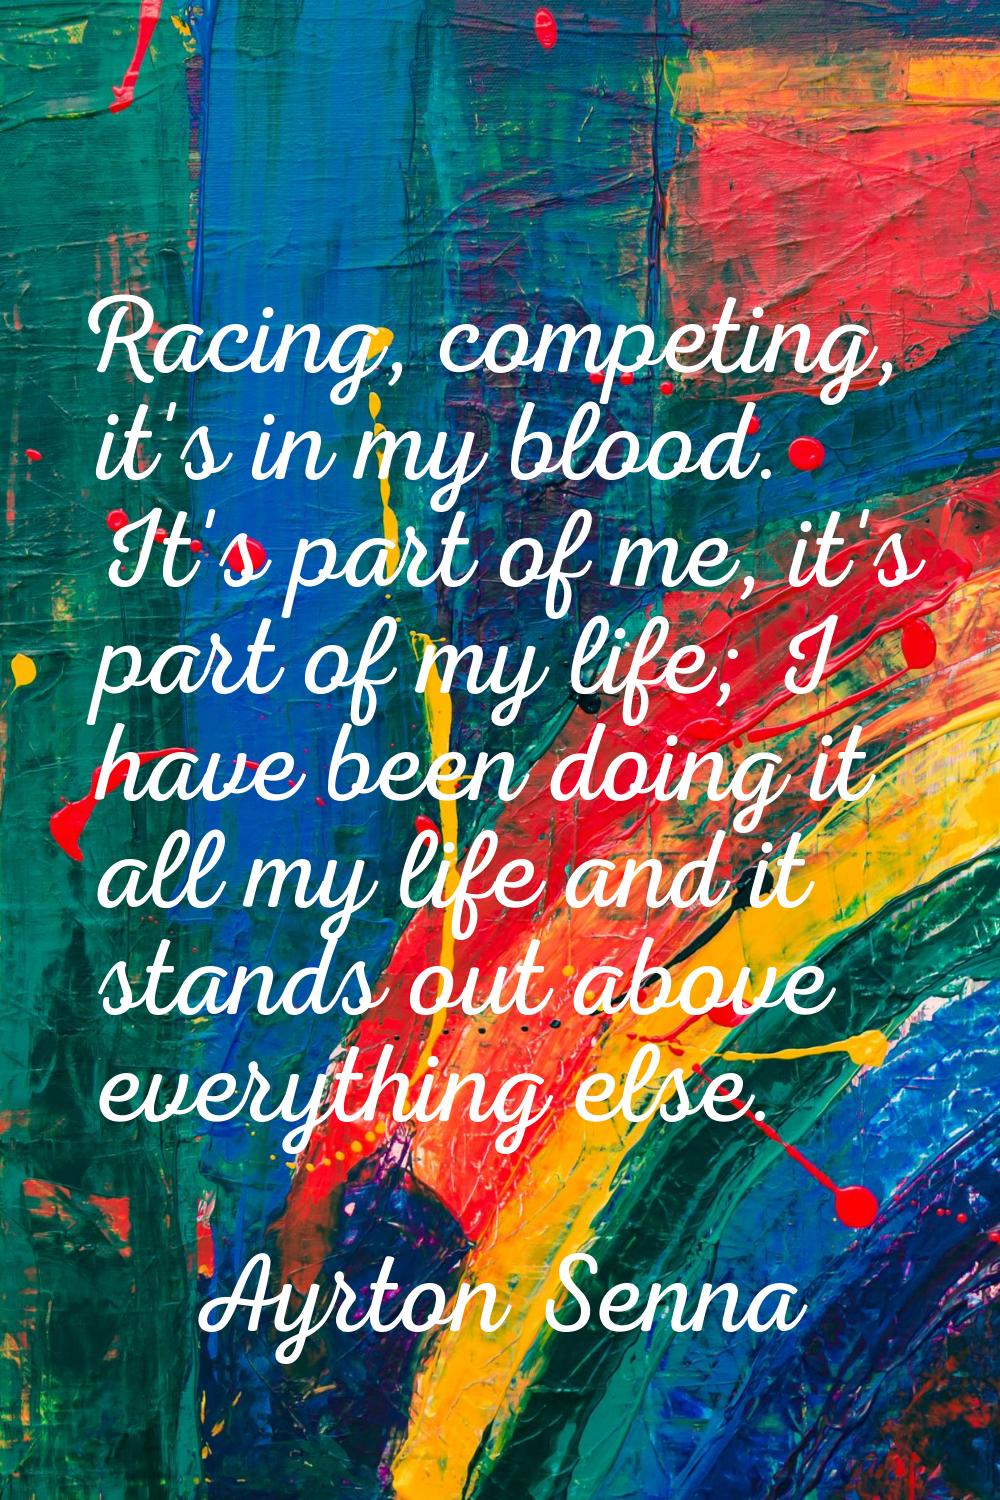 Racing, competing, it's in my blood. It's part of me, it's part of my life; I have been doing it al